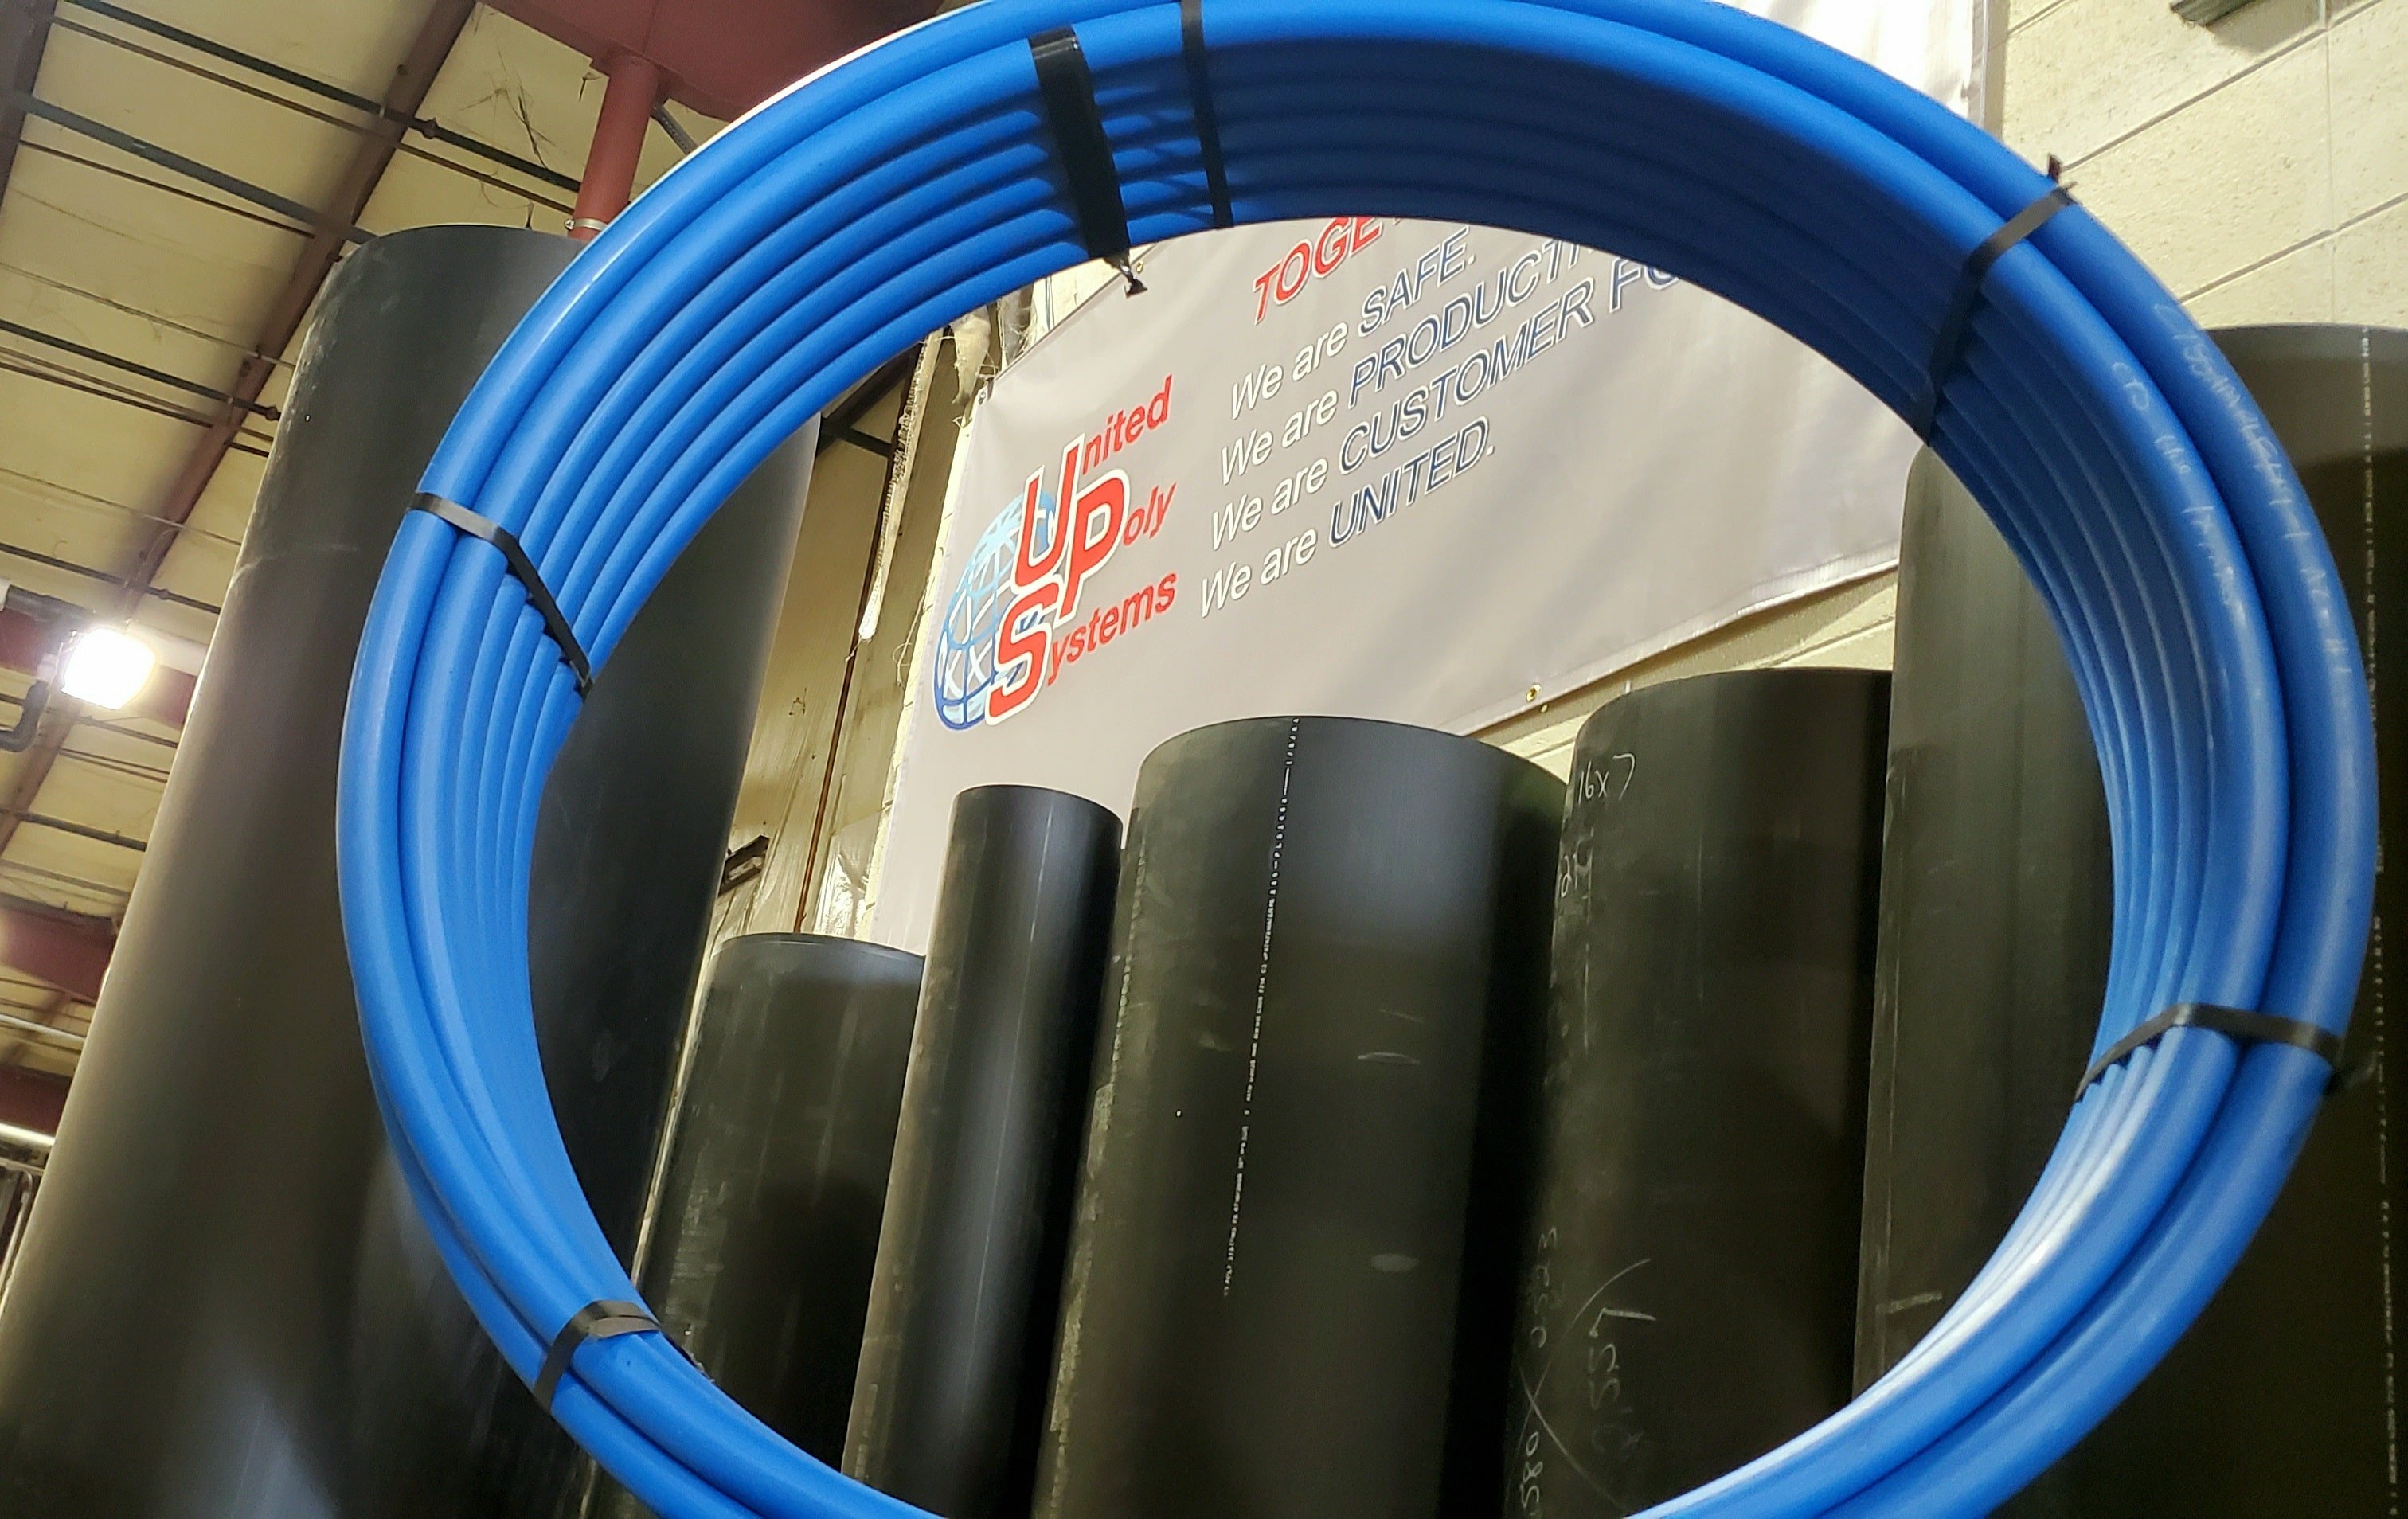 HDPE Piping Benefits Water and Sewer Markets